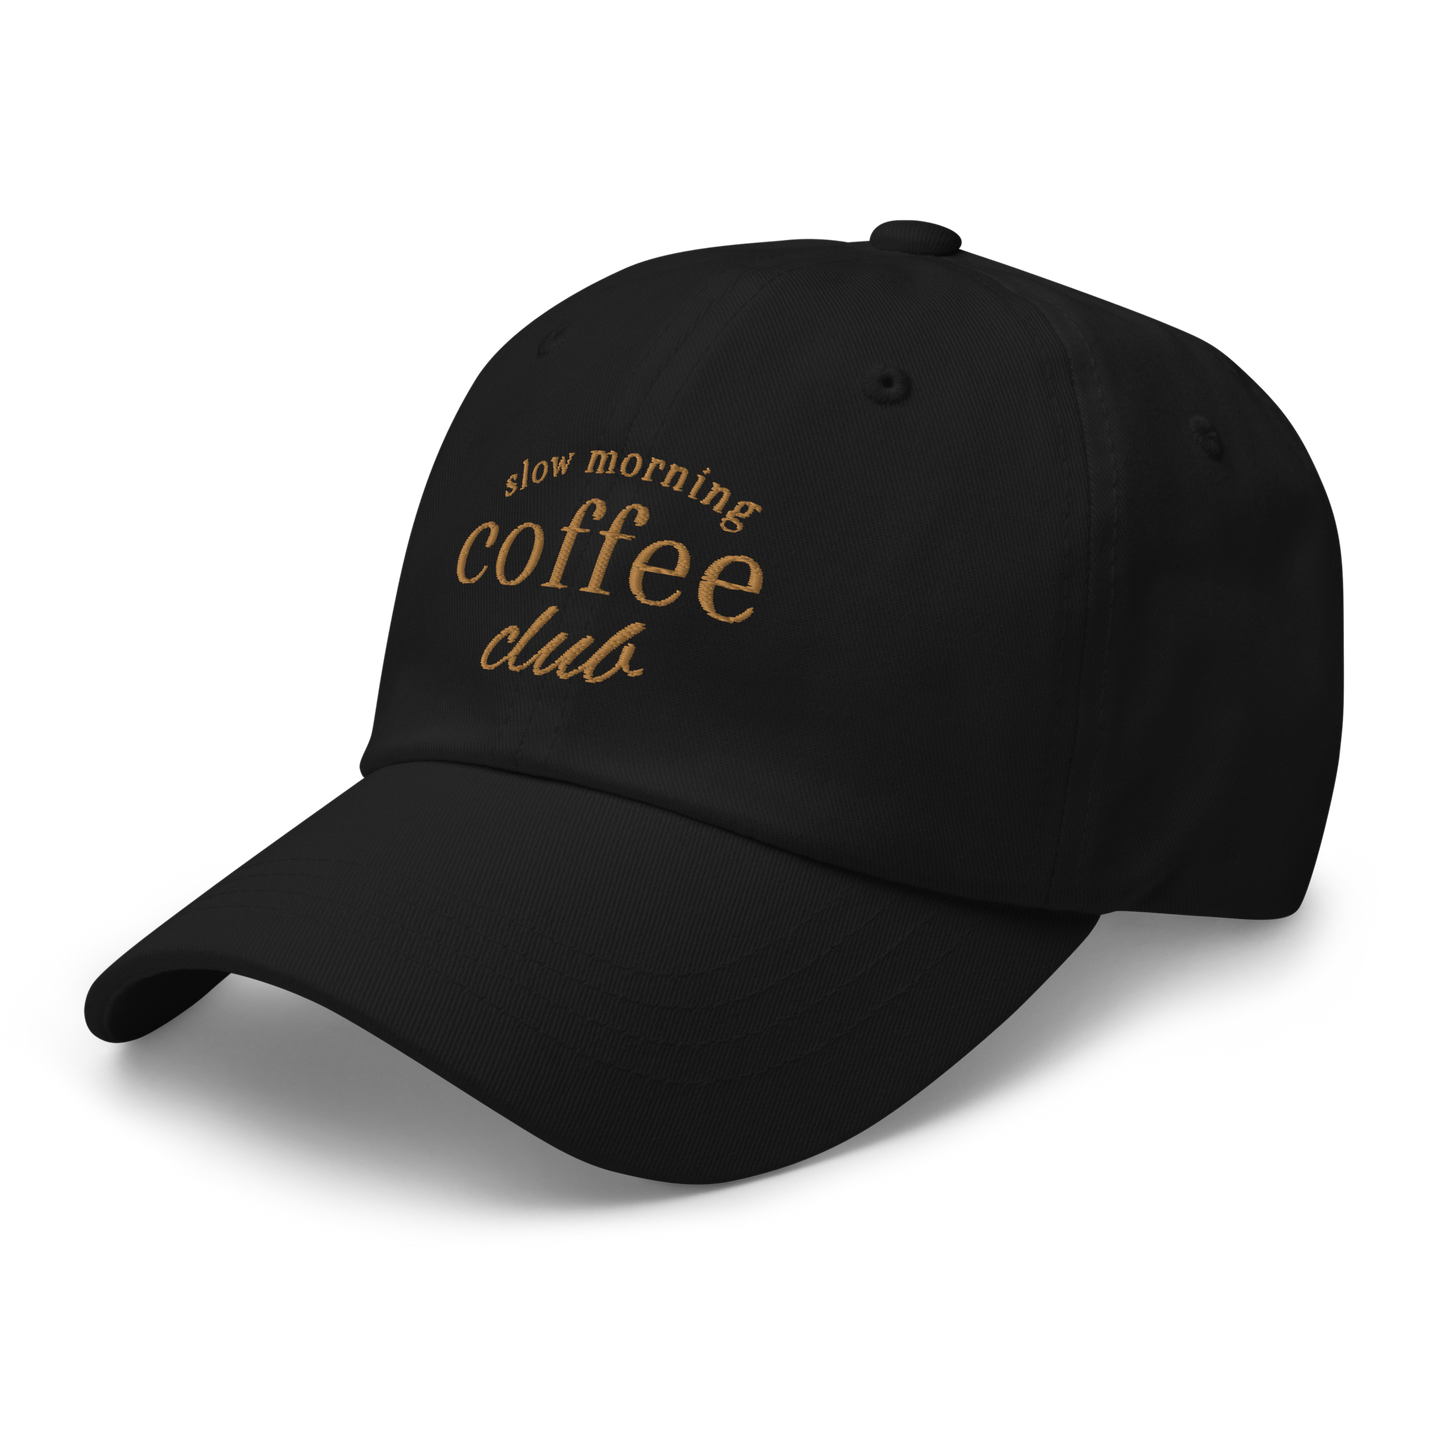 Club(s) Collection - Slow Morning Coffee Club Dad Hat